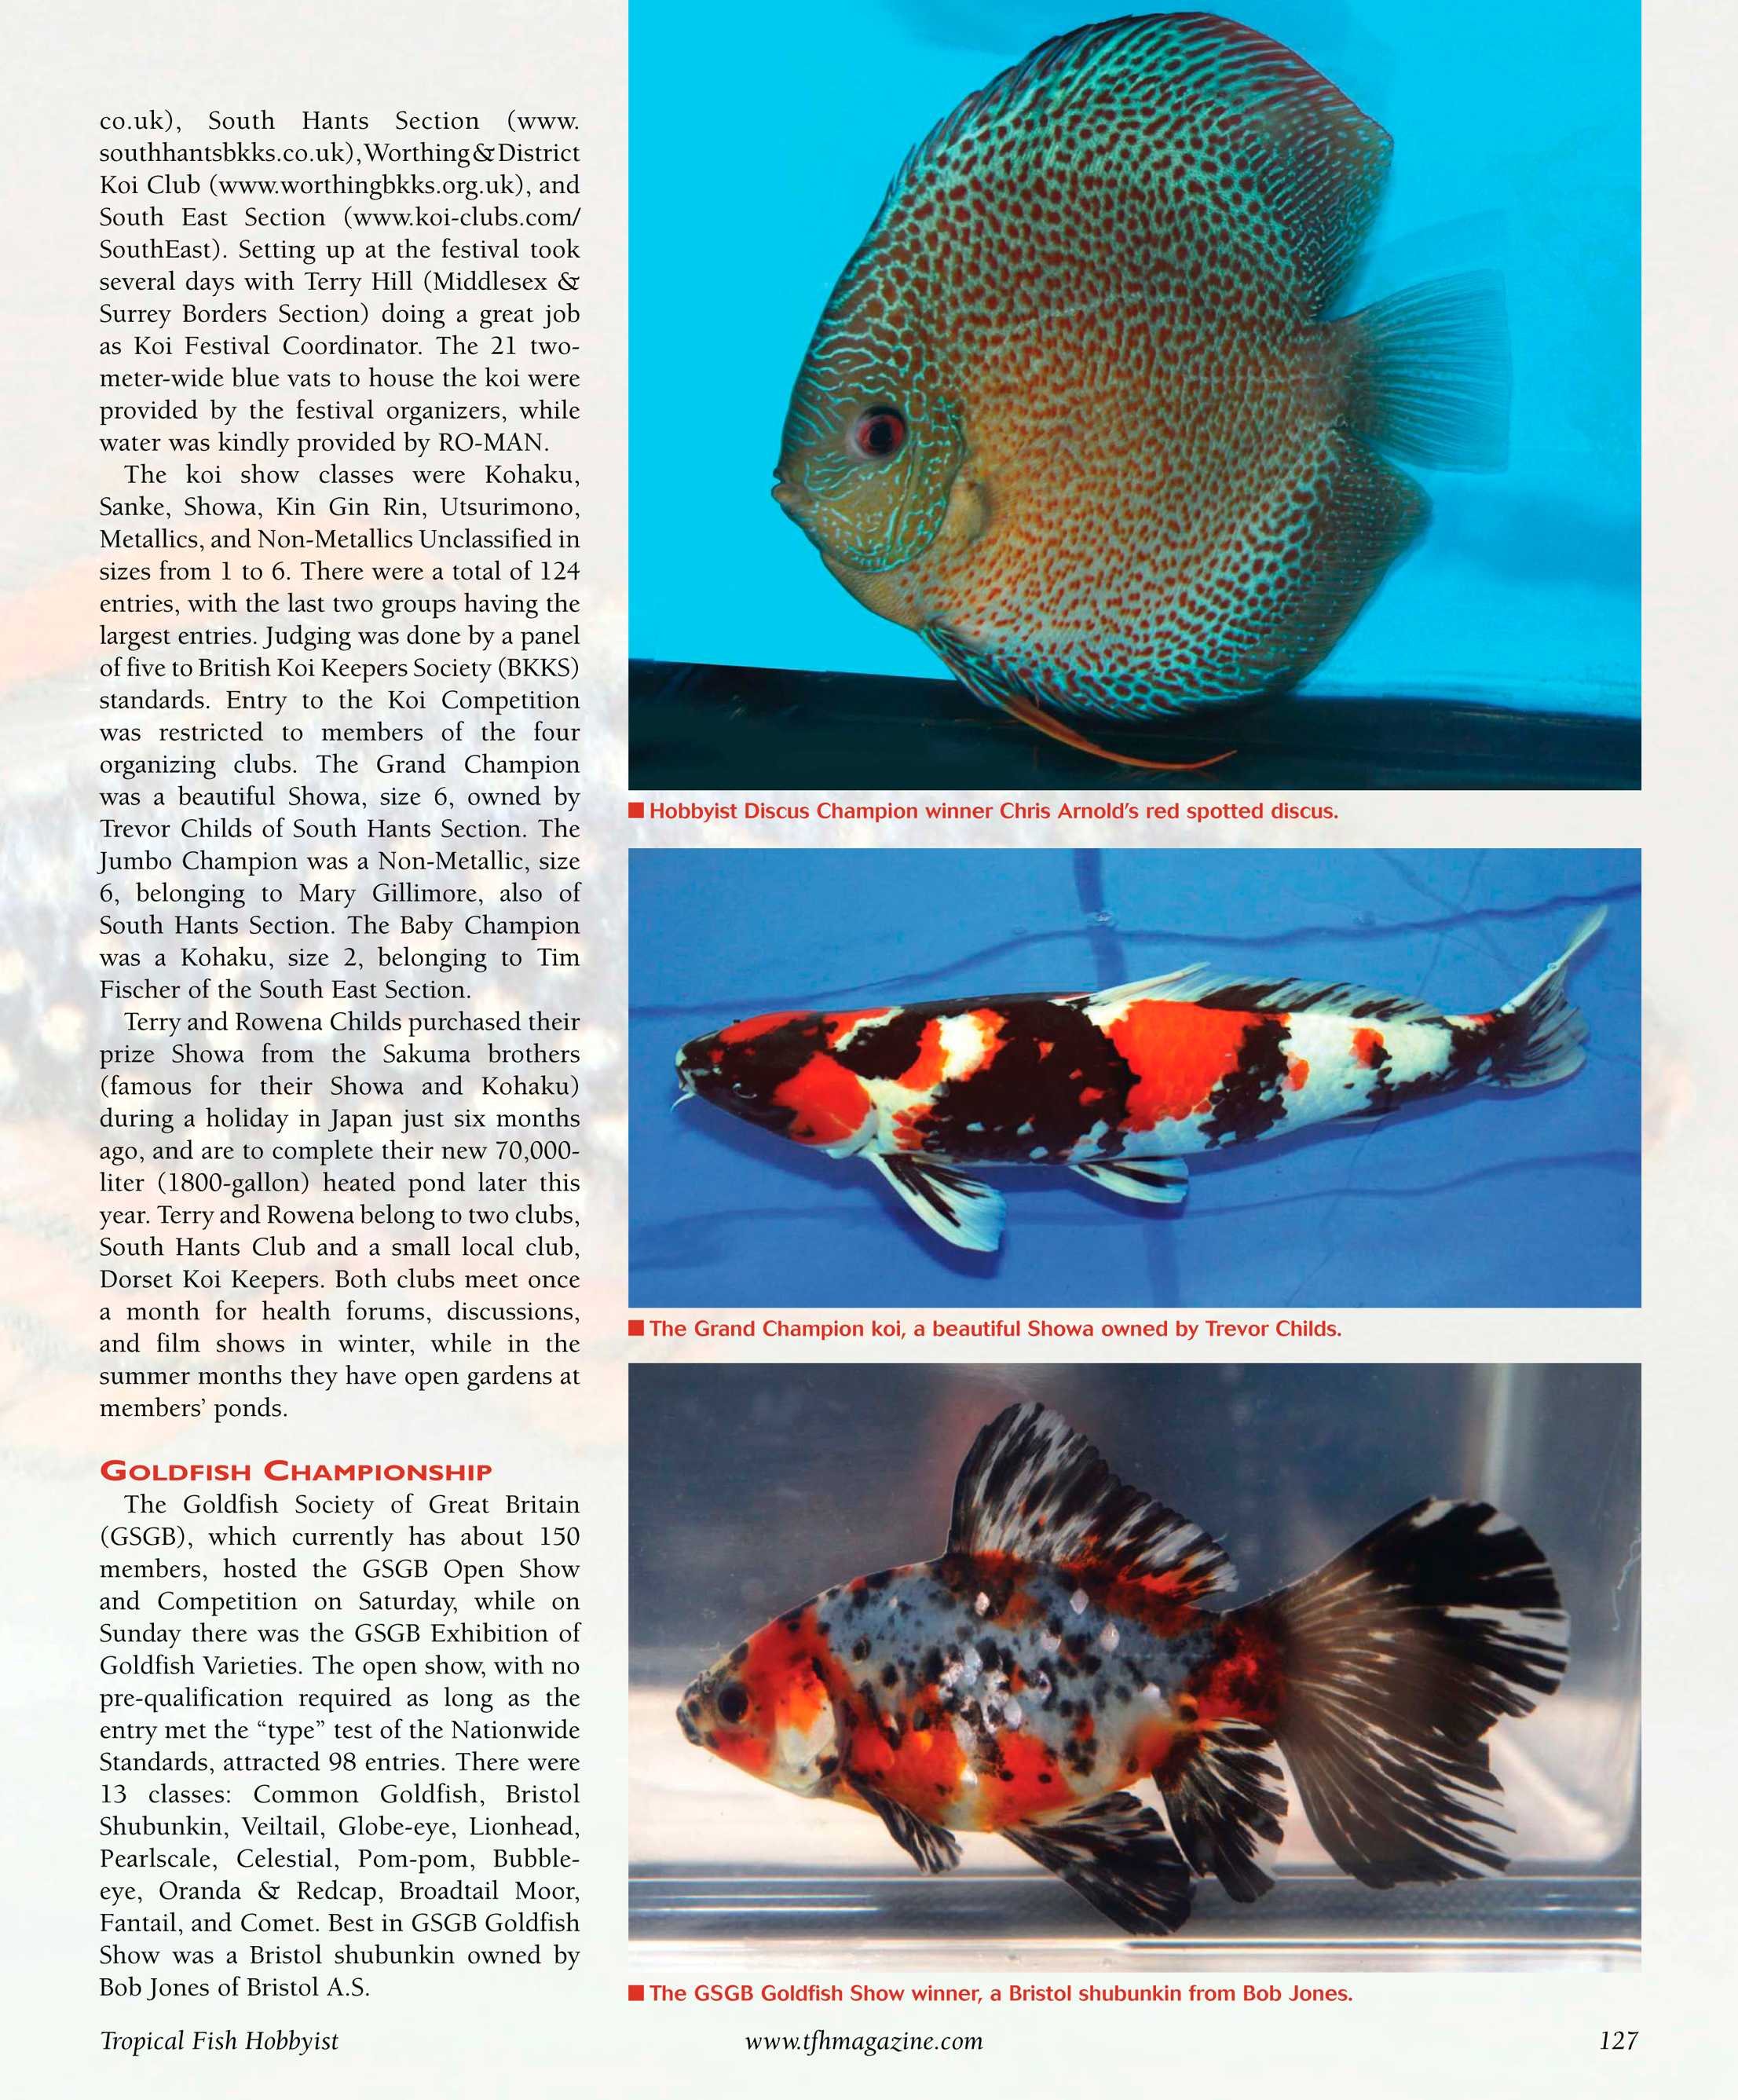 Tropical Fish Hobbyist - February 2008 - page 127